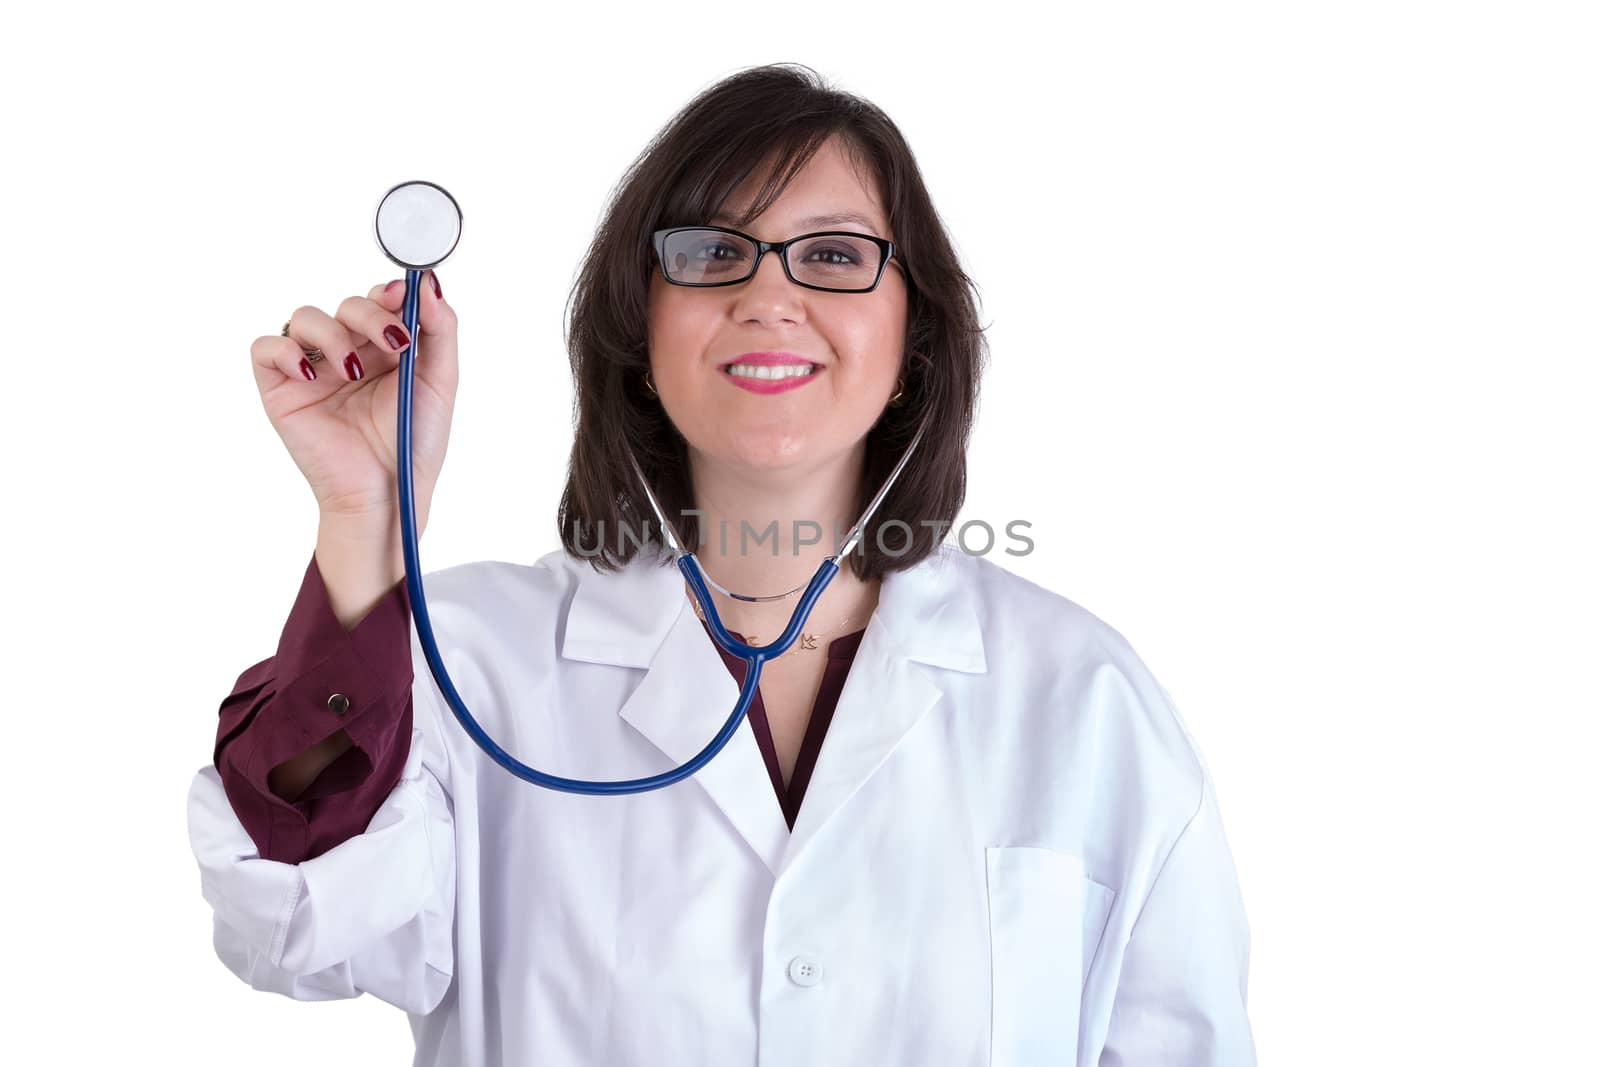 Sympathetic healthcare Intern looking at you genuinely and friendly while holding her stethoscope high